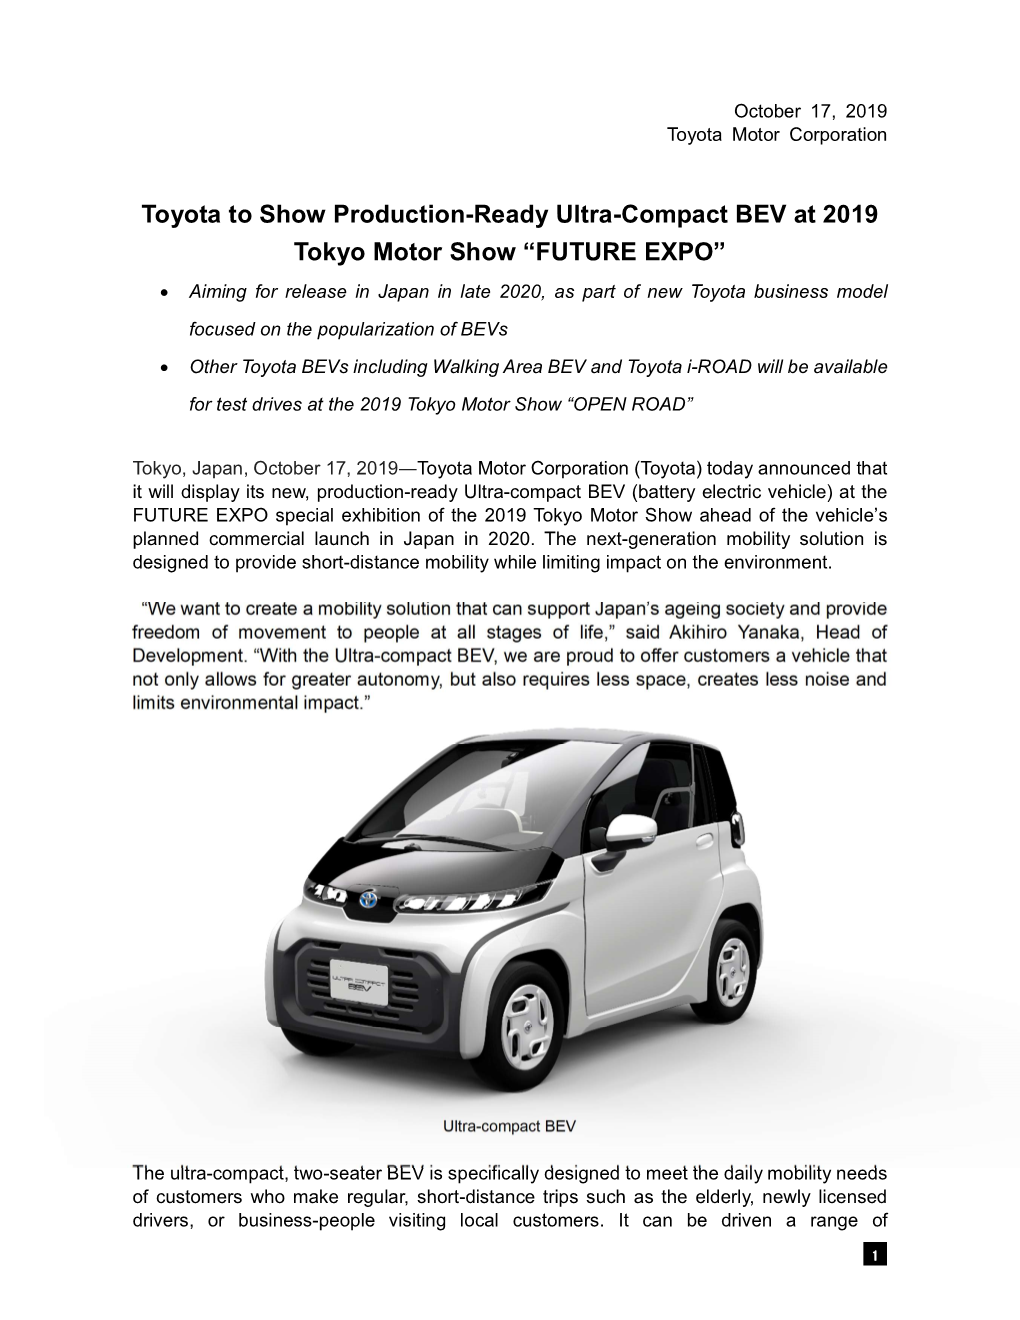 Toyota to Show Production-Ready Ultra-Compact BEV at 2019 Tokyo